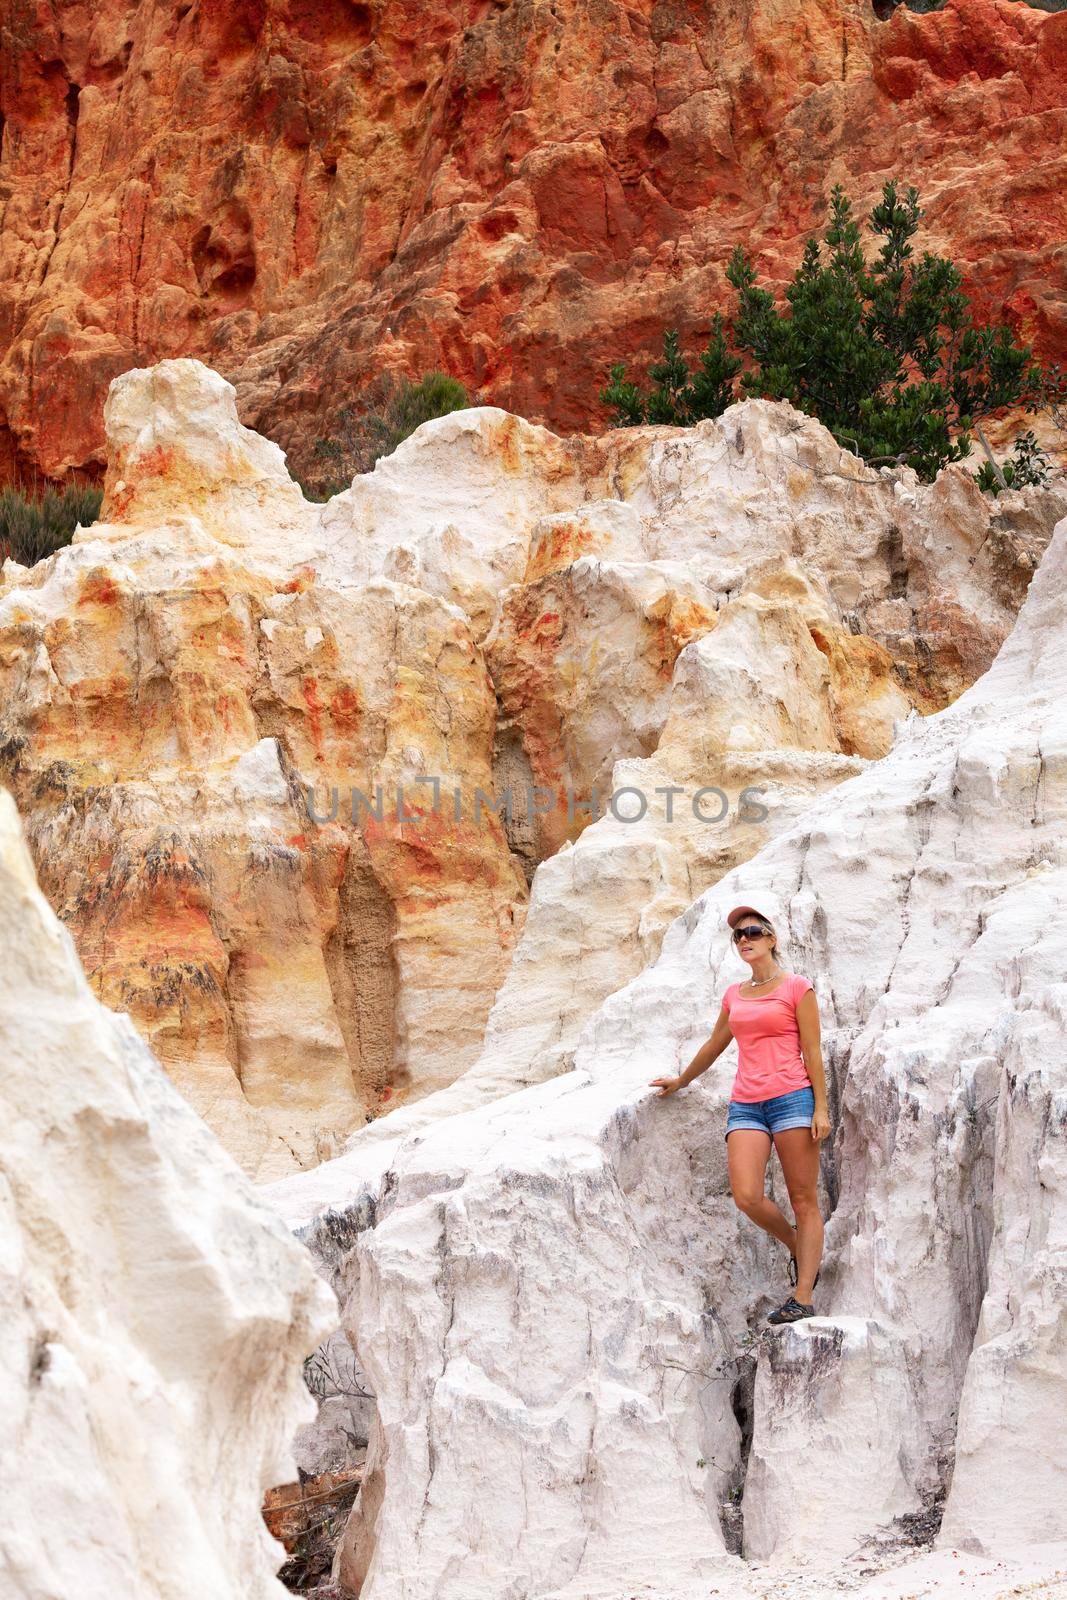 Tourist exploring the red and white cliffs of Ben Boyd in Australia by lovleah